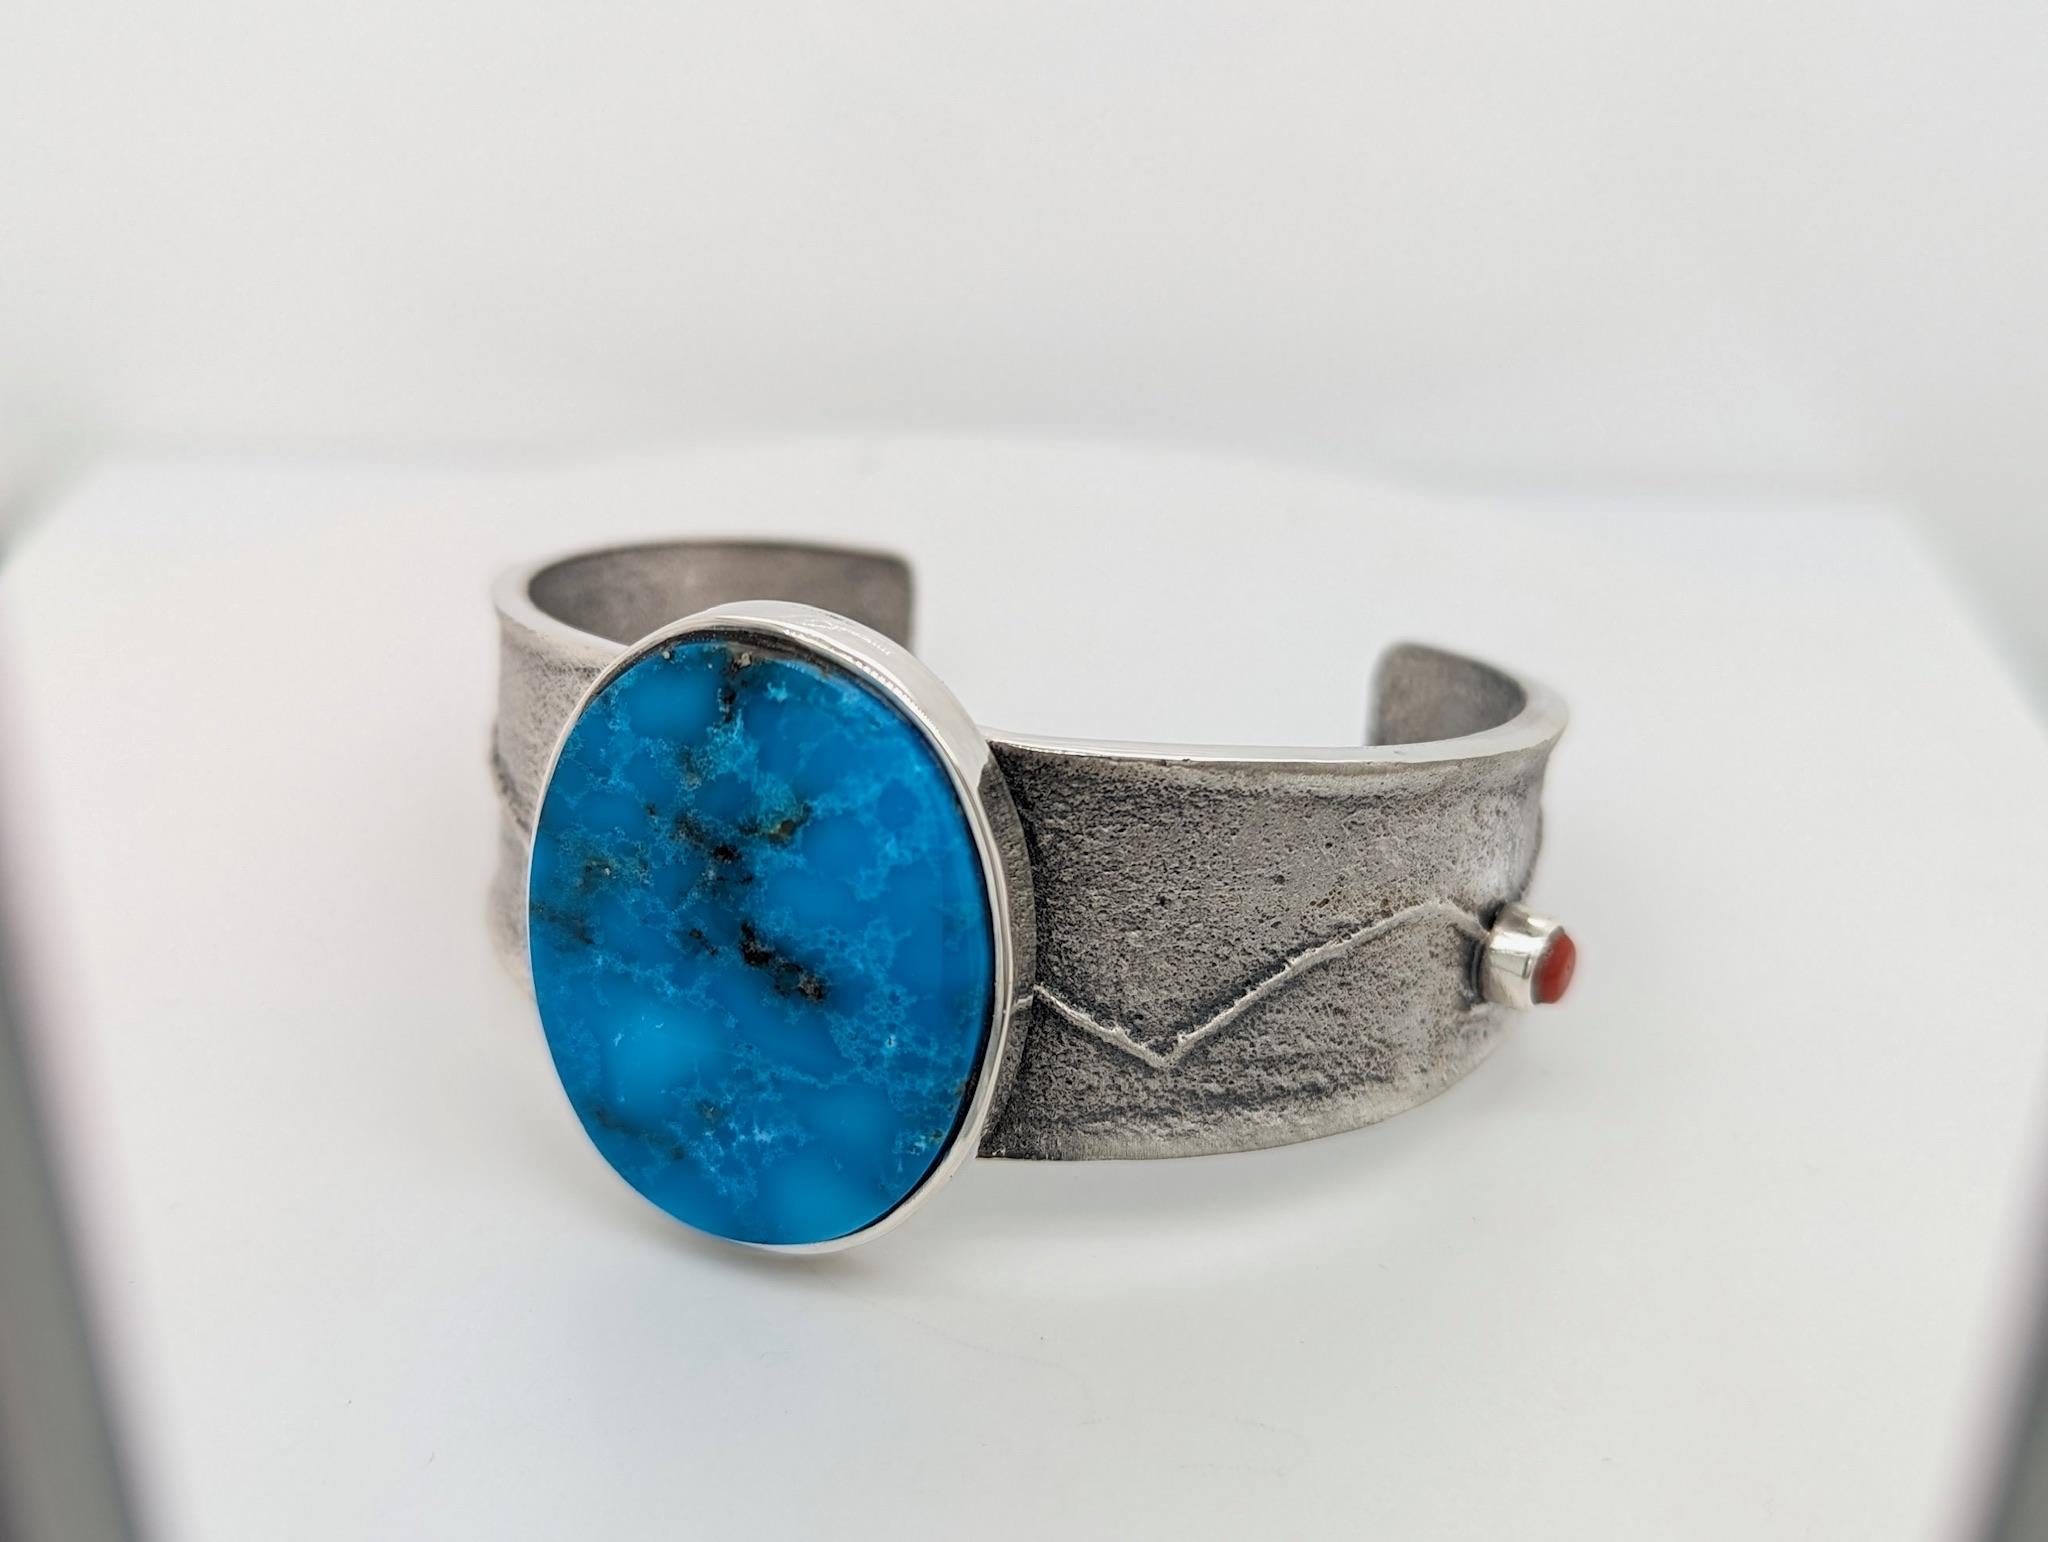 Embrace the beauty of nature's textures with this captivating Medium Handmade Bracelet. This unique piece features genuine Kingmalaquoise gemstones, meticulously set in a tufa cast base for an organic and earthy look. Accents of vibrant coral add a